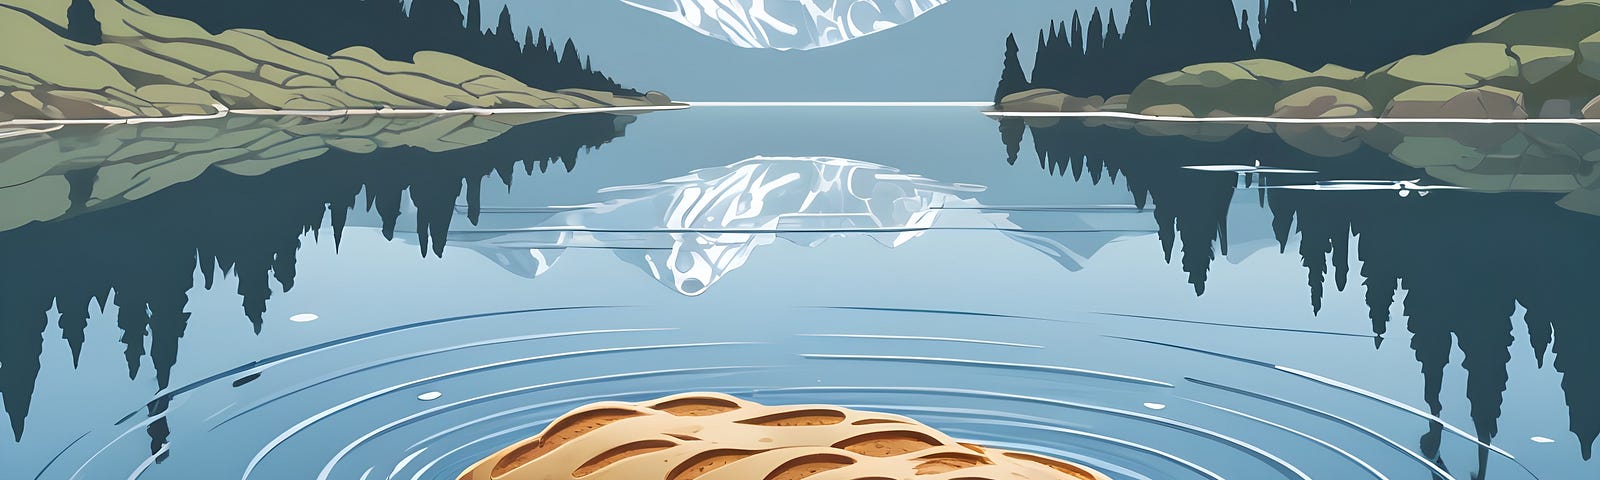 Bread floating on a mountain lake